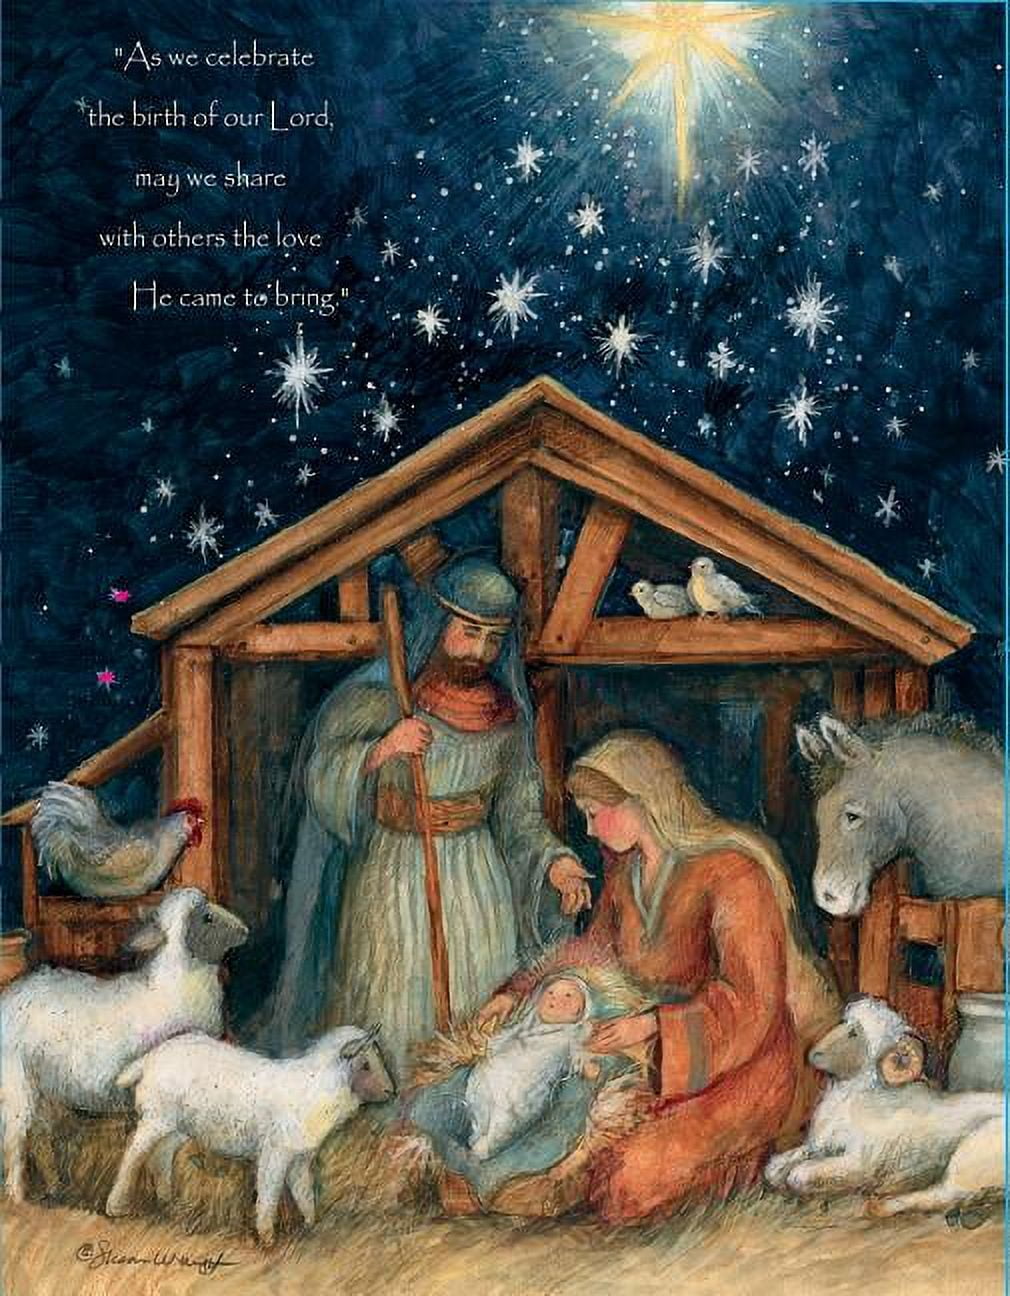 Holy Family Christmas Cards (Other) - Walmart.com